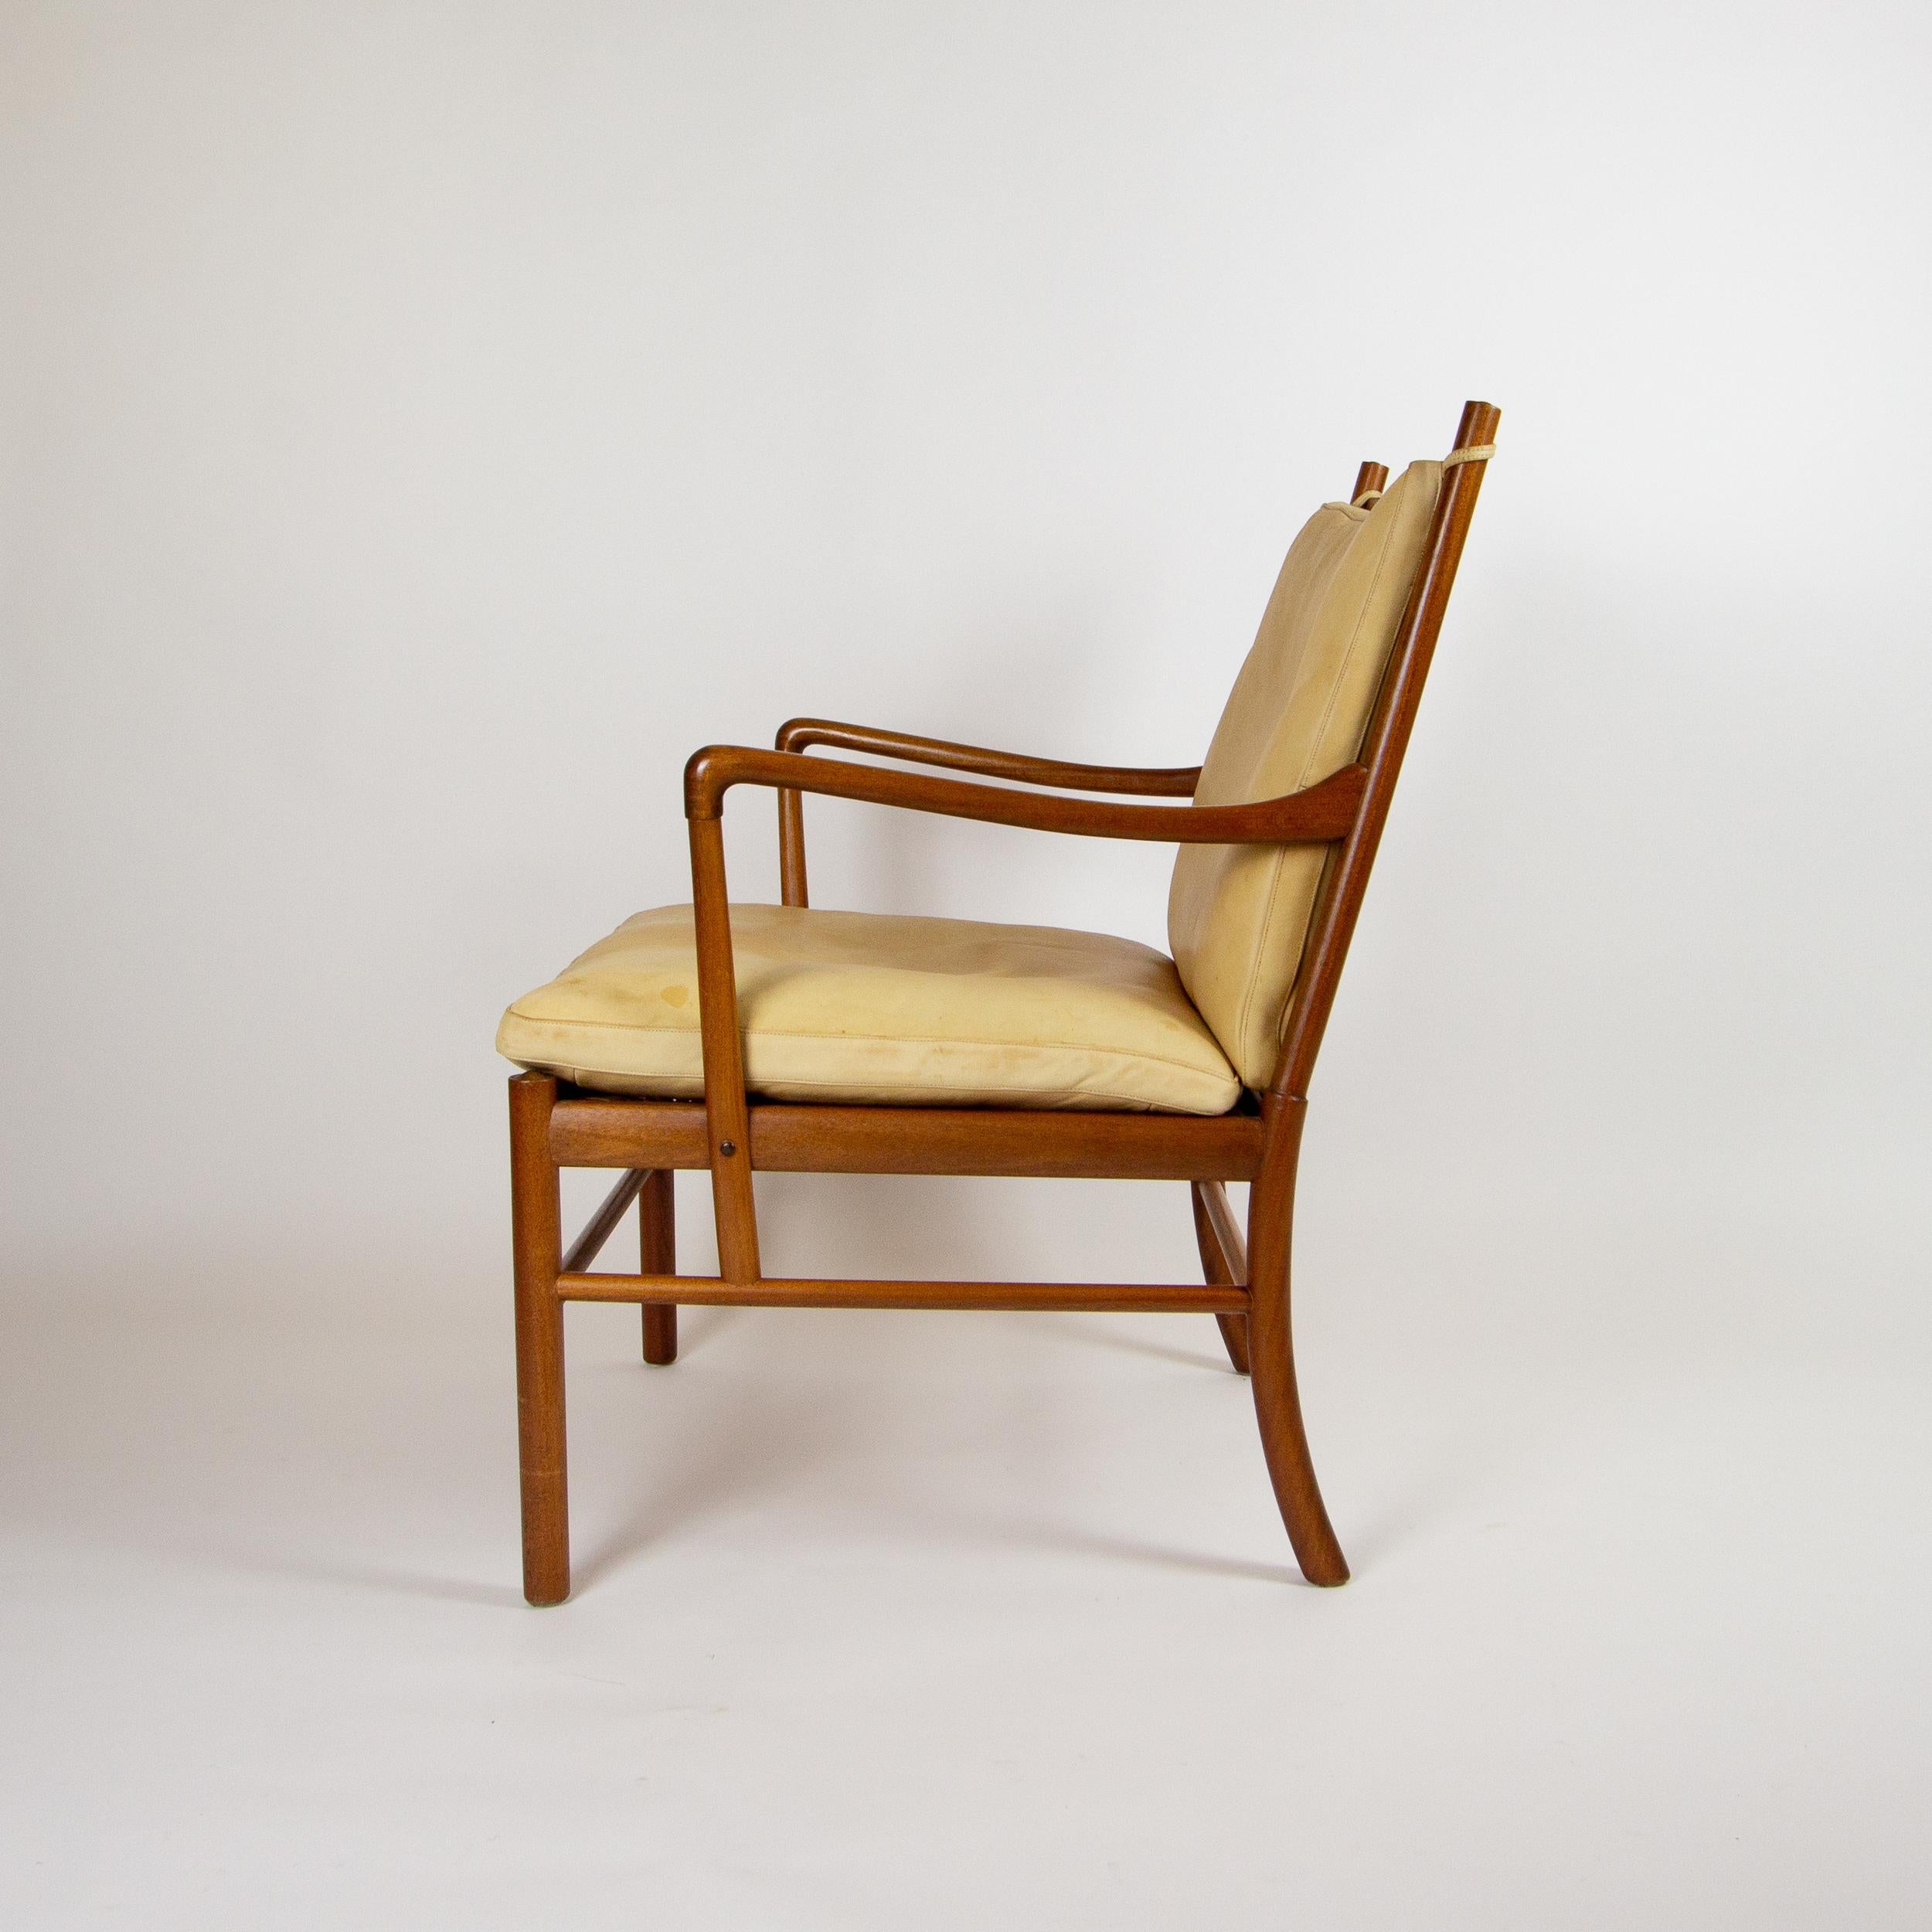 Hand-Crafted Mahogany and Cream Leather Colonial Chair by Ole Wanscher for Poul Jeppesen